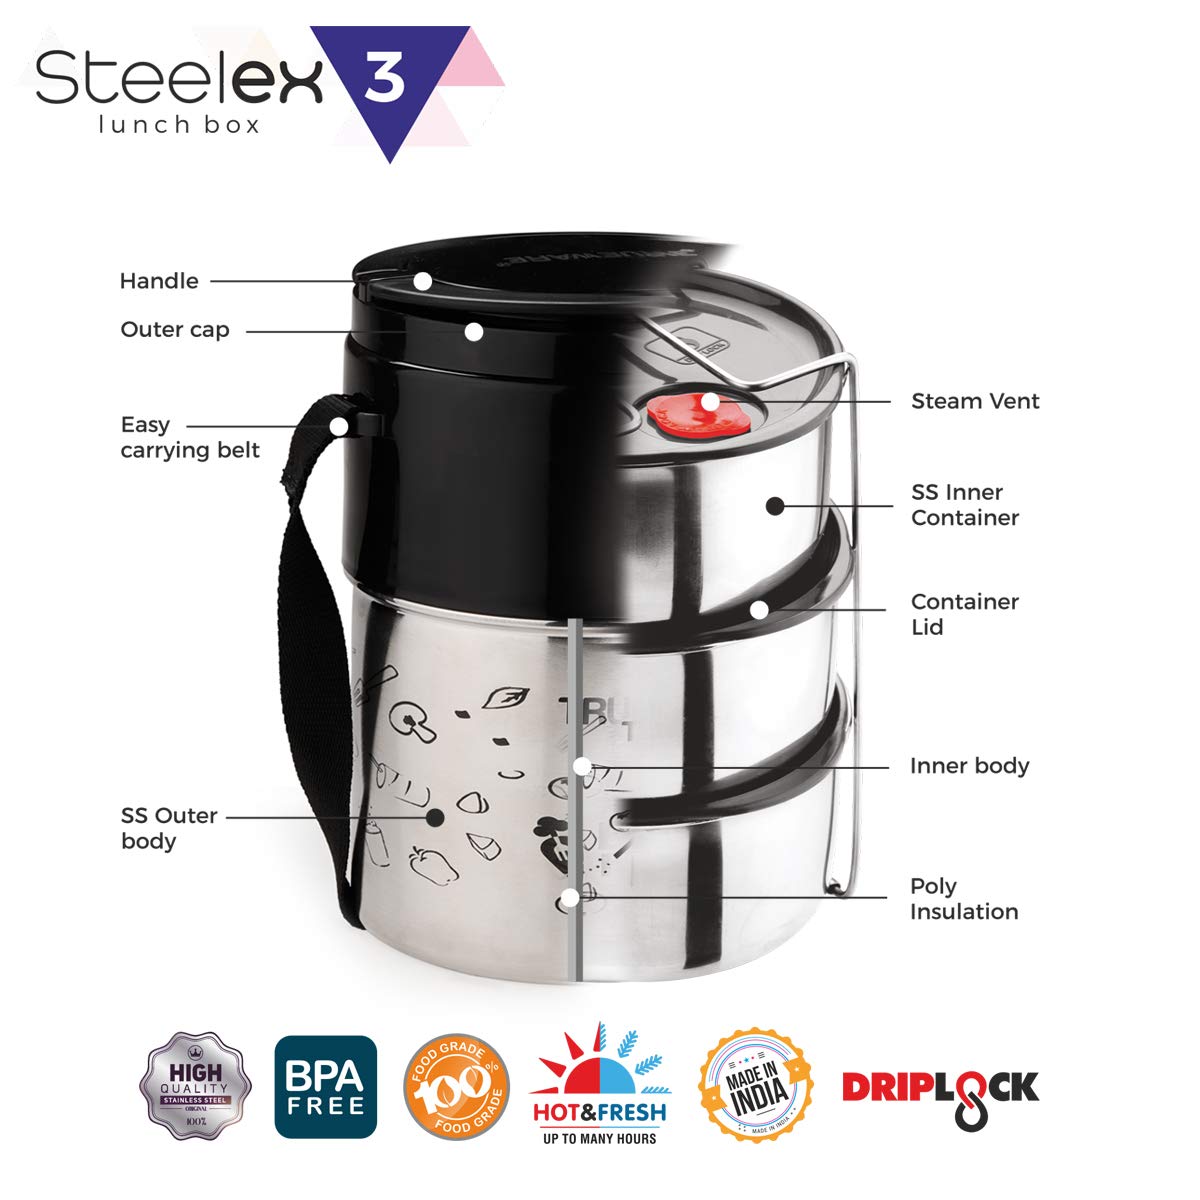 Trueware Steelex 3 Lunch Box, Stainless Steel each 350ml 3Container, Insulated Lunch Carrier, 1piece